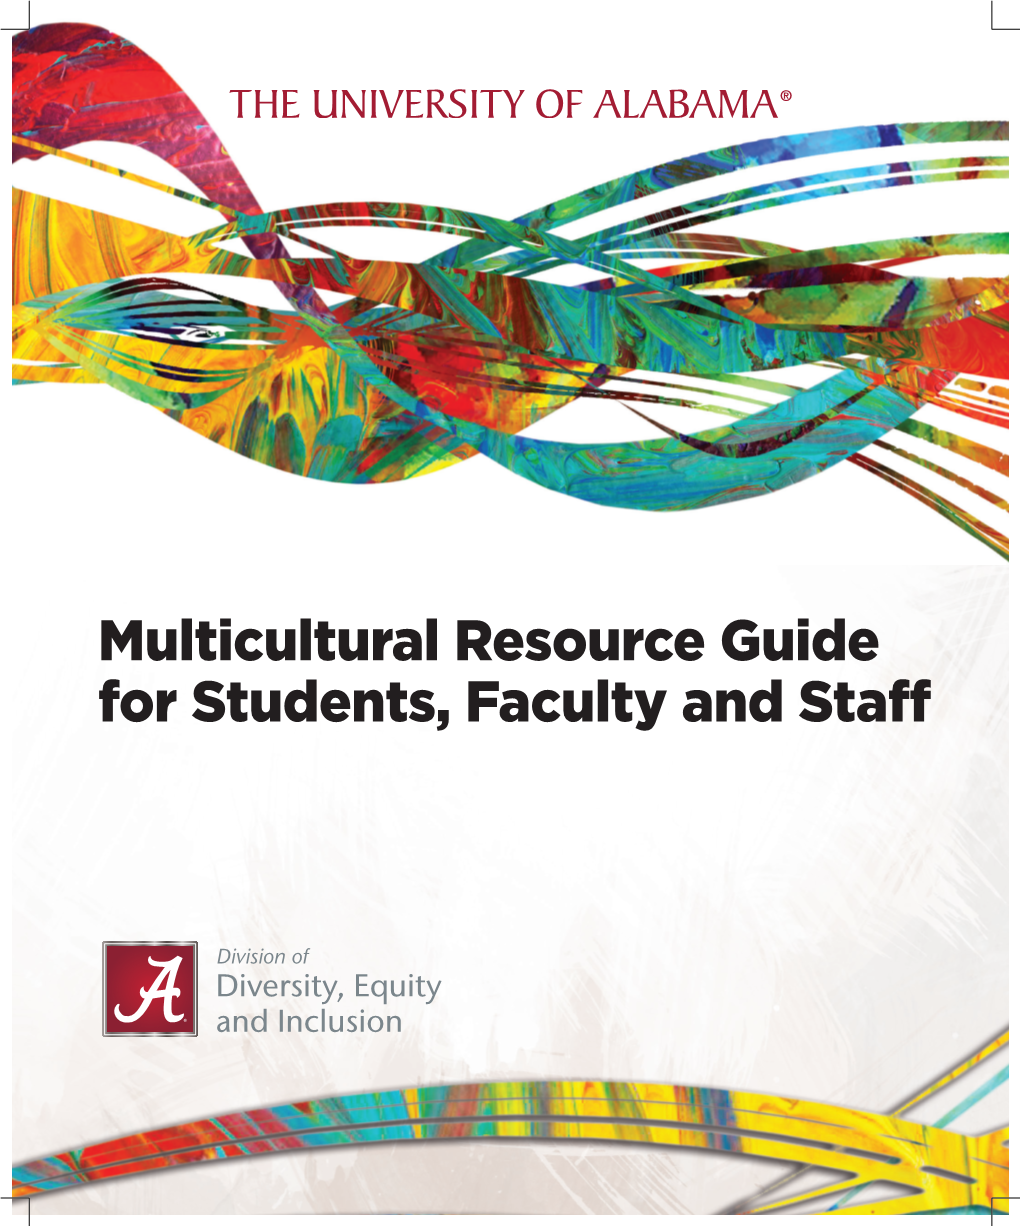 Multicultural Resource Guide for Students, Faculty and Staff